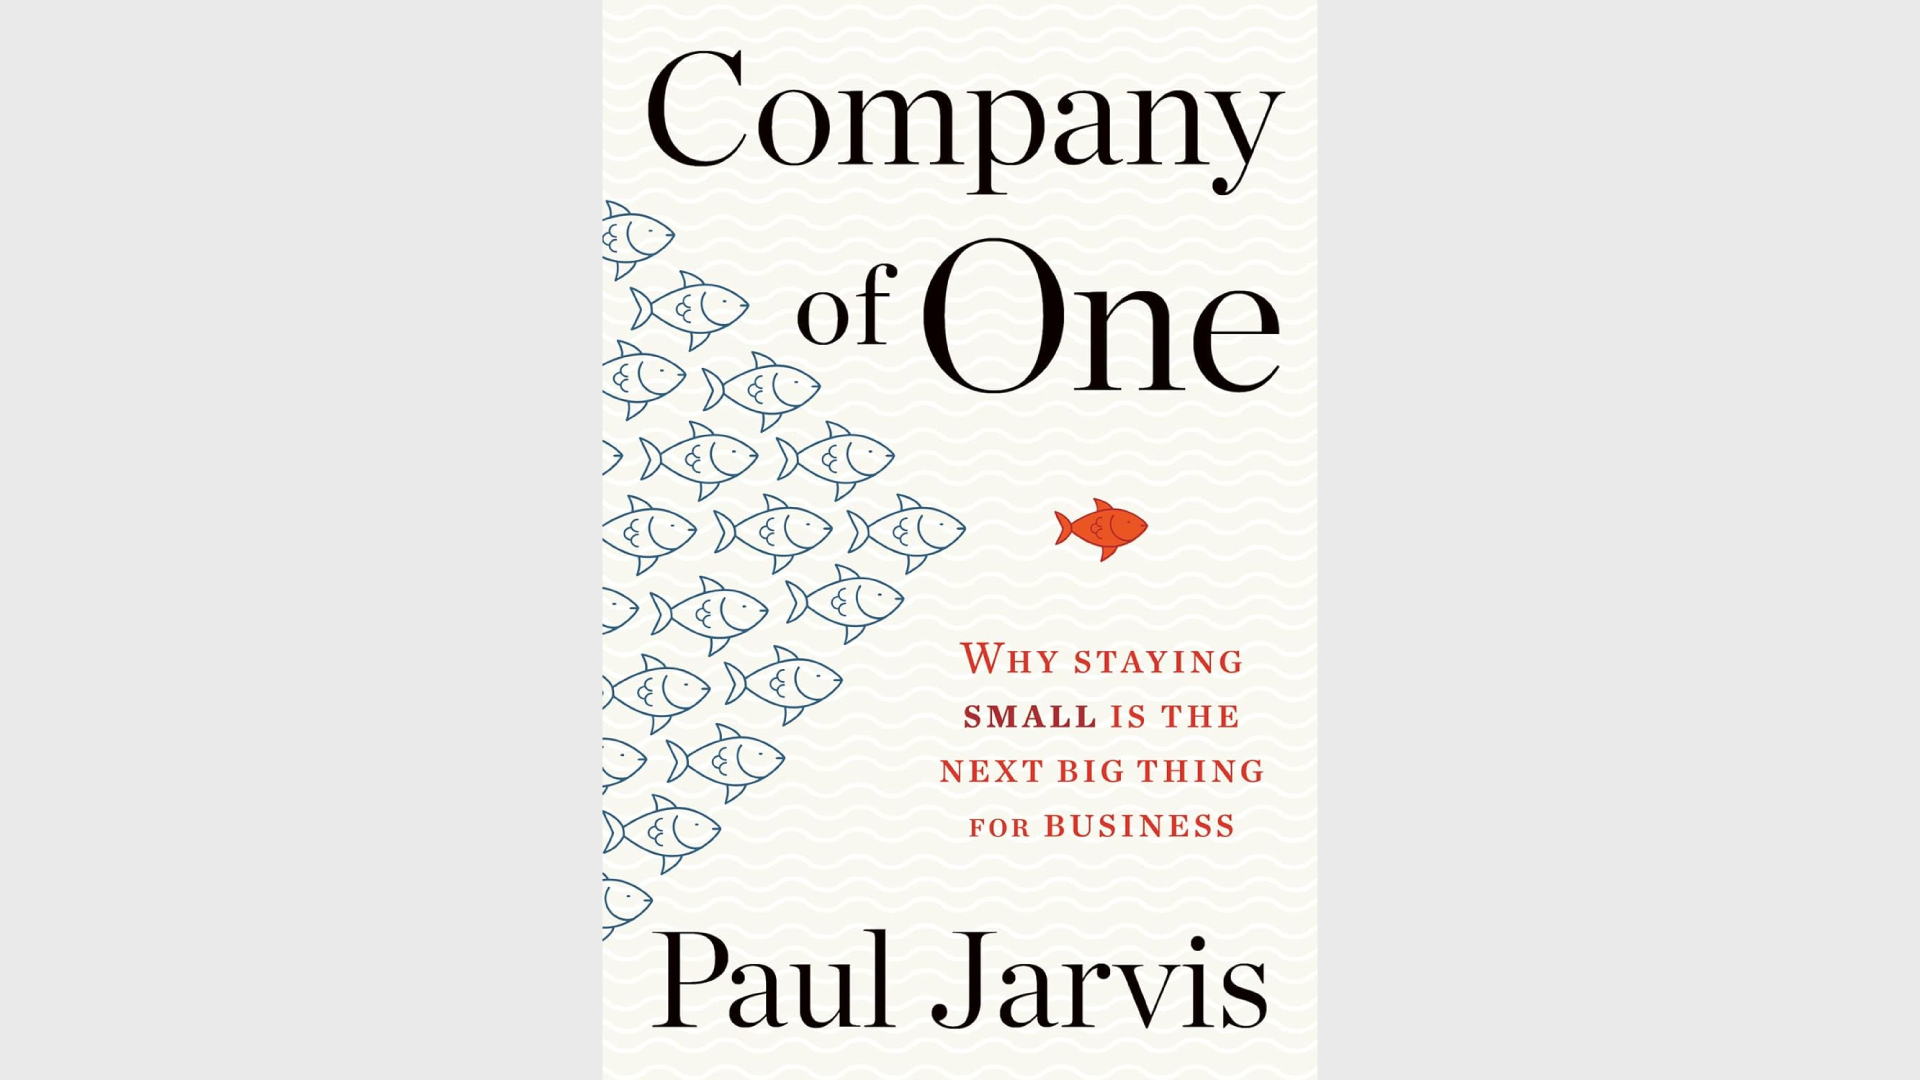 Summary: Company Of One by Paul Jarvis